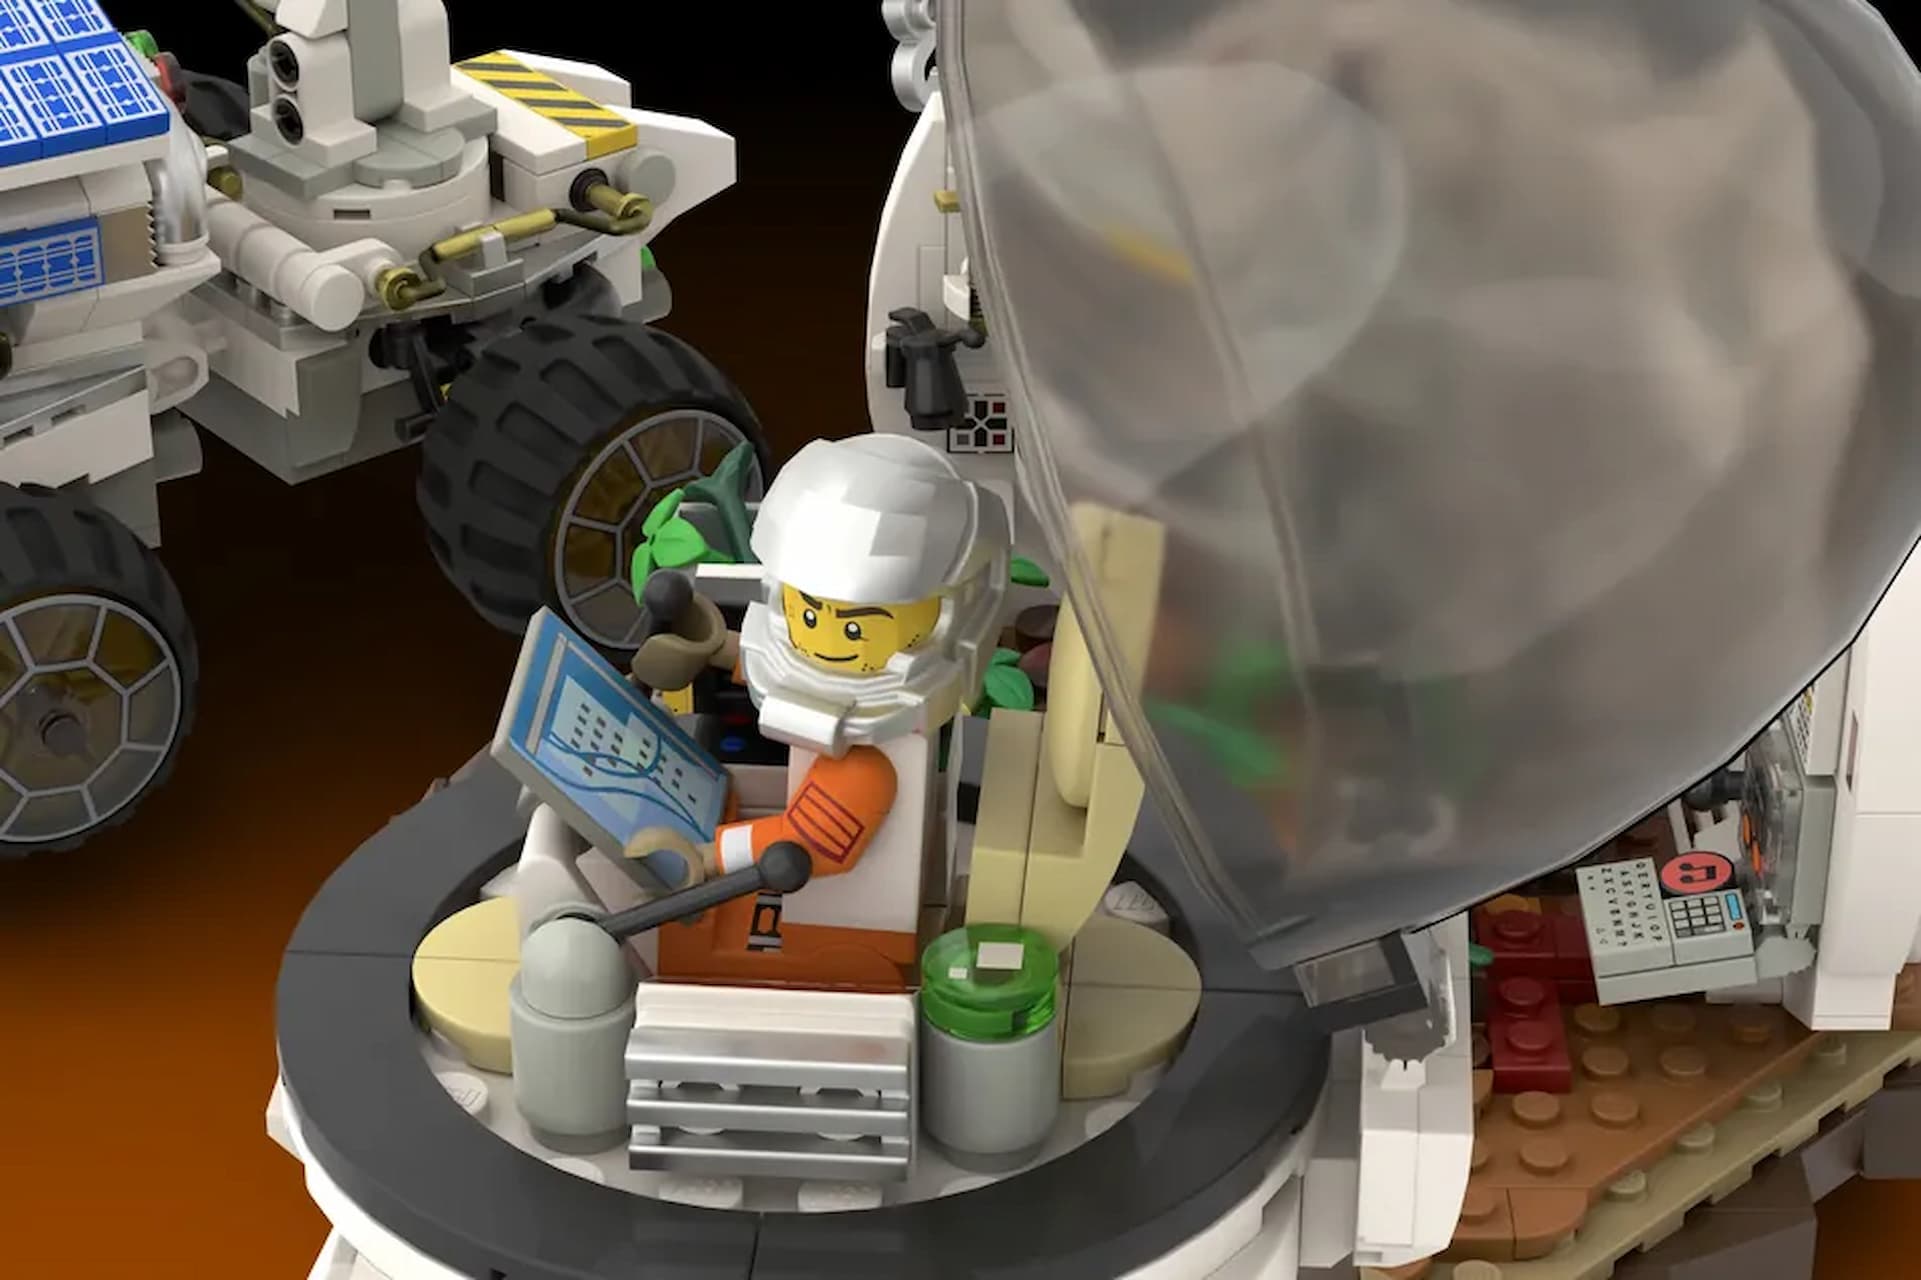 A concept image of the Lego Ideas The Martian submission